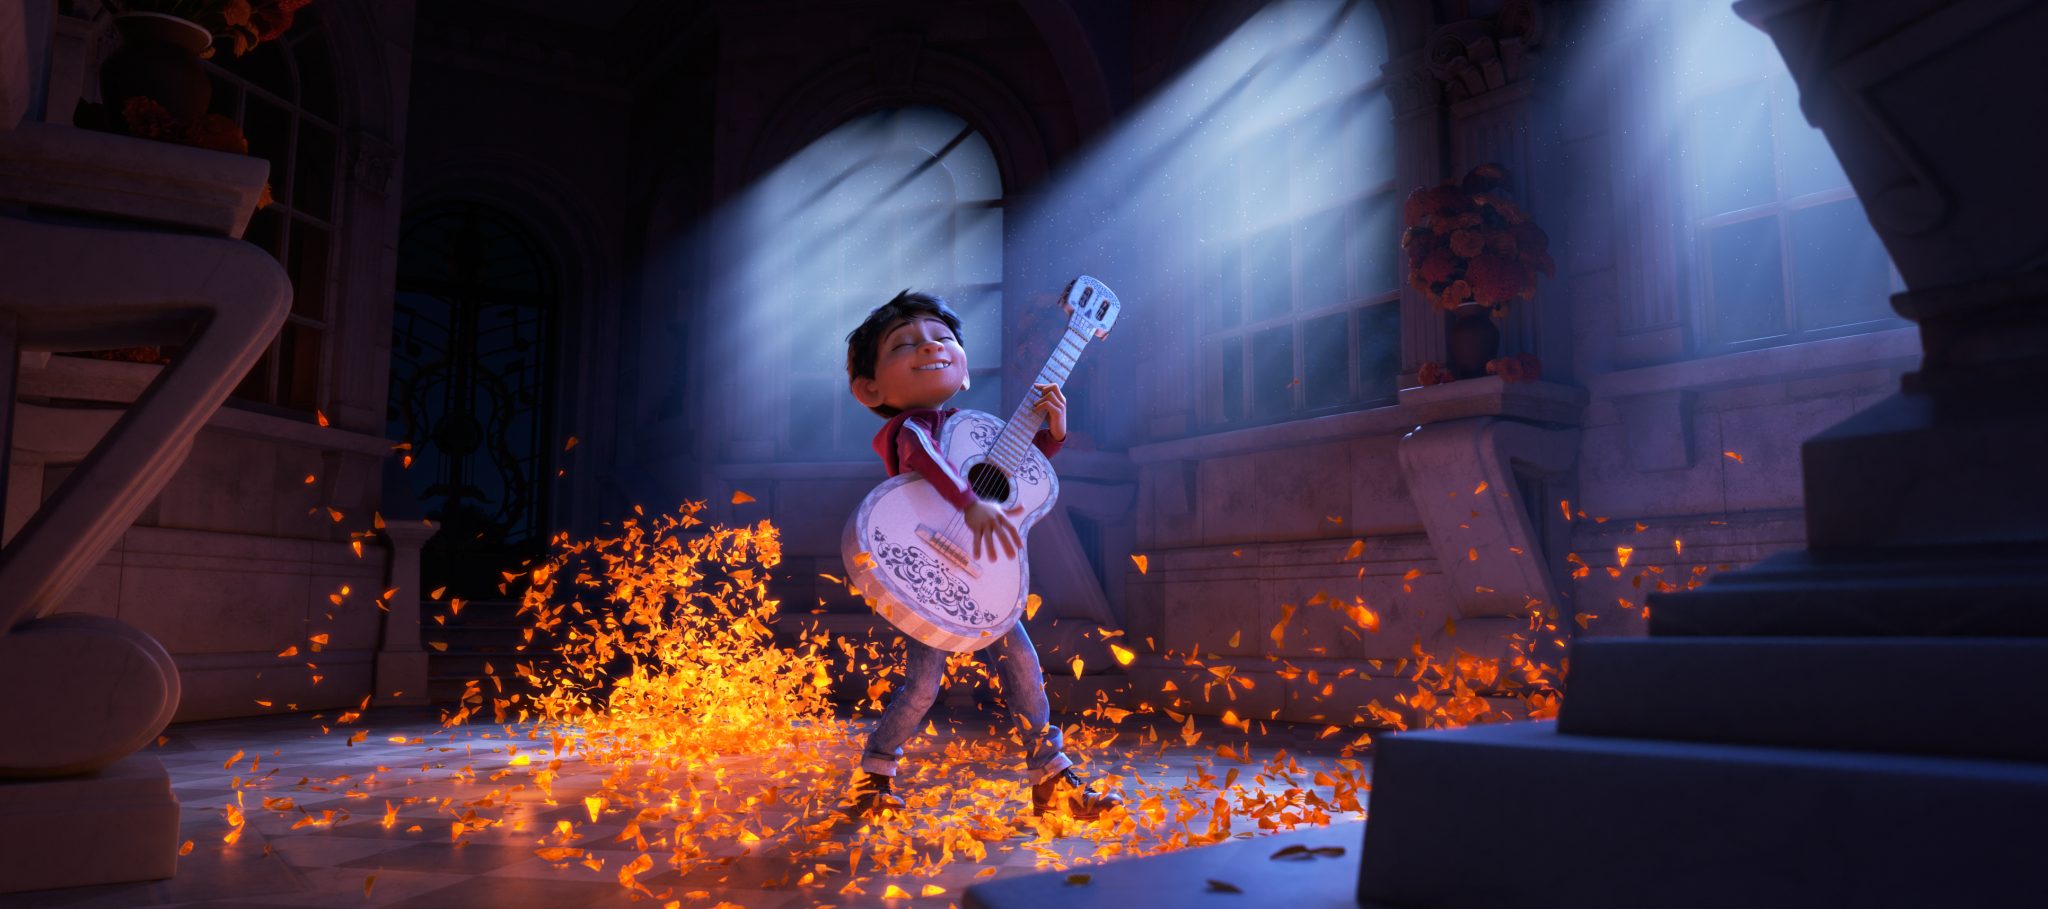 Disney•Pixar’s “COCO” Crosses Over Digitally in HD, 4K Ultra HD™ and Movies Anywhere on Feb. 13 and 4K Ultra HD™ & Blu-ray™ on Feb. 27